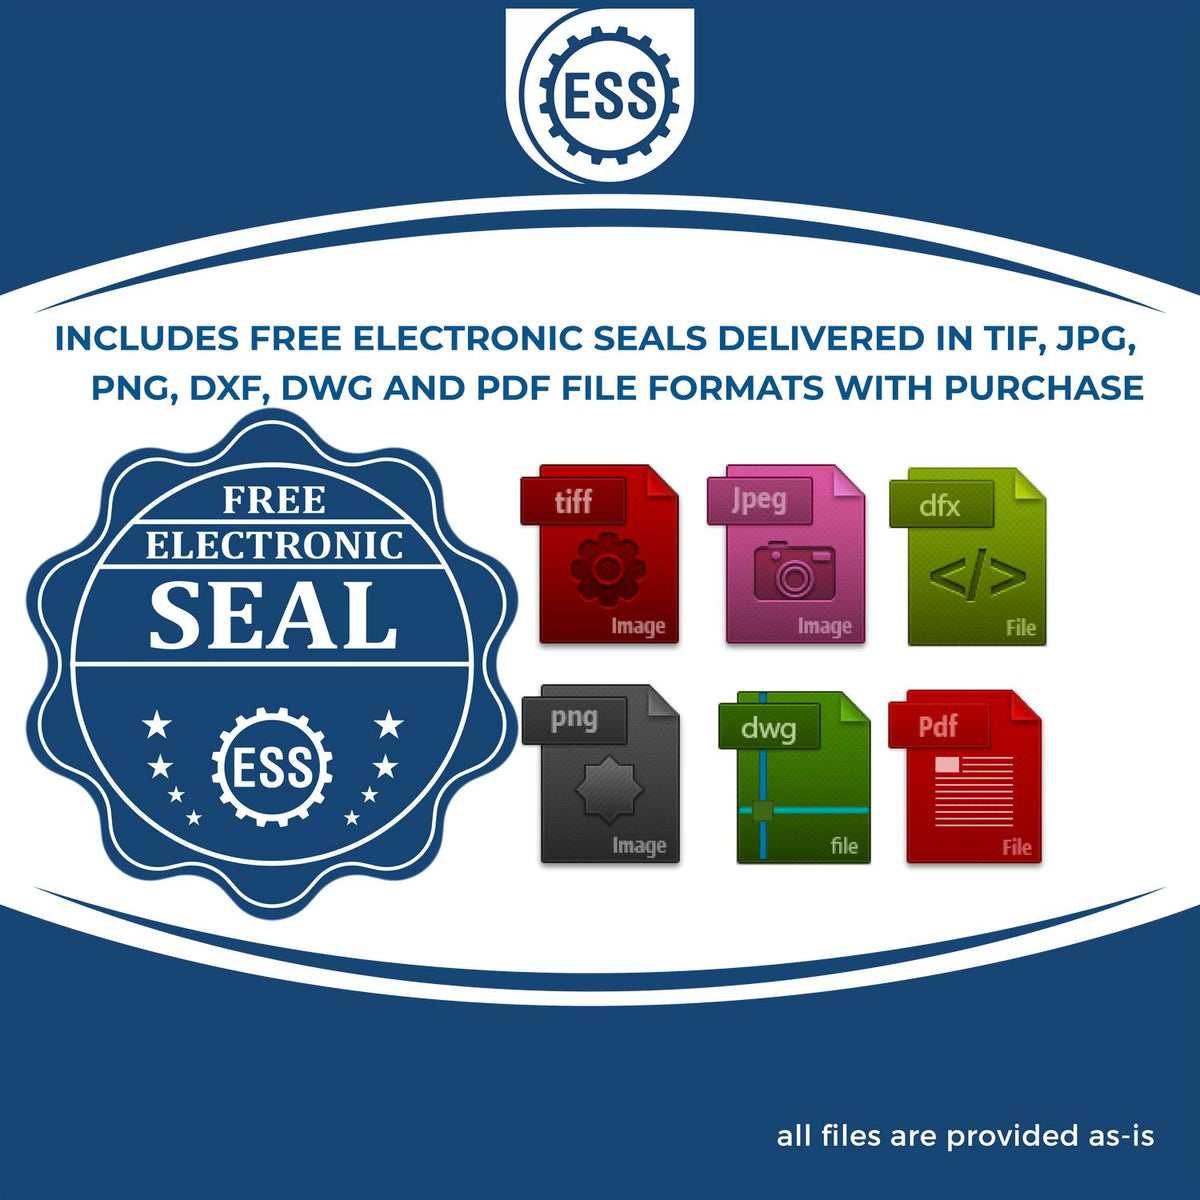 An infographic for the free electronic seal for the Extended Long Reach Kansas Architect Seal Embosser illustrating the different file type icons such as DXF, DWG, TIF, JPG and PNG.